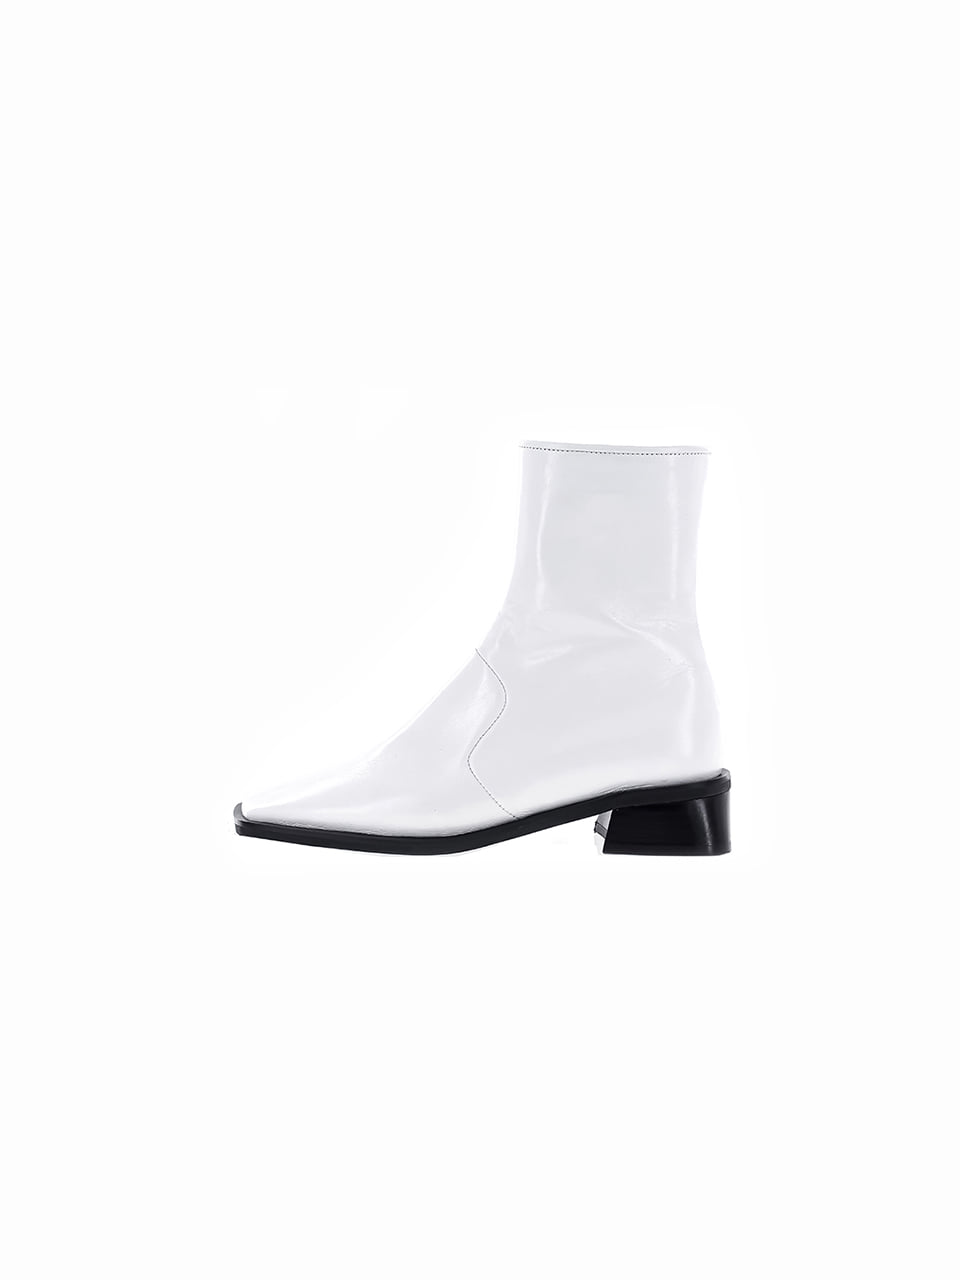 LZ middle boots_white